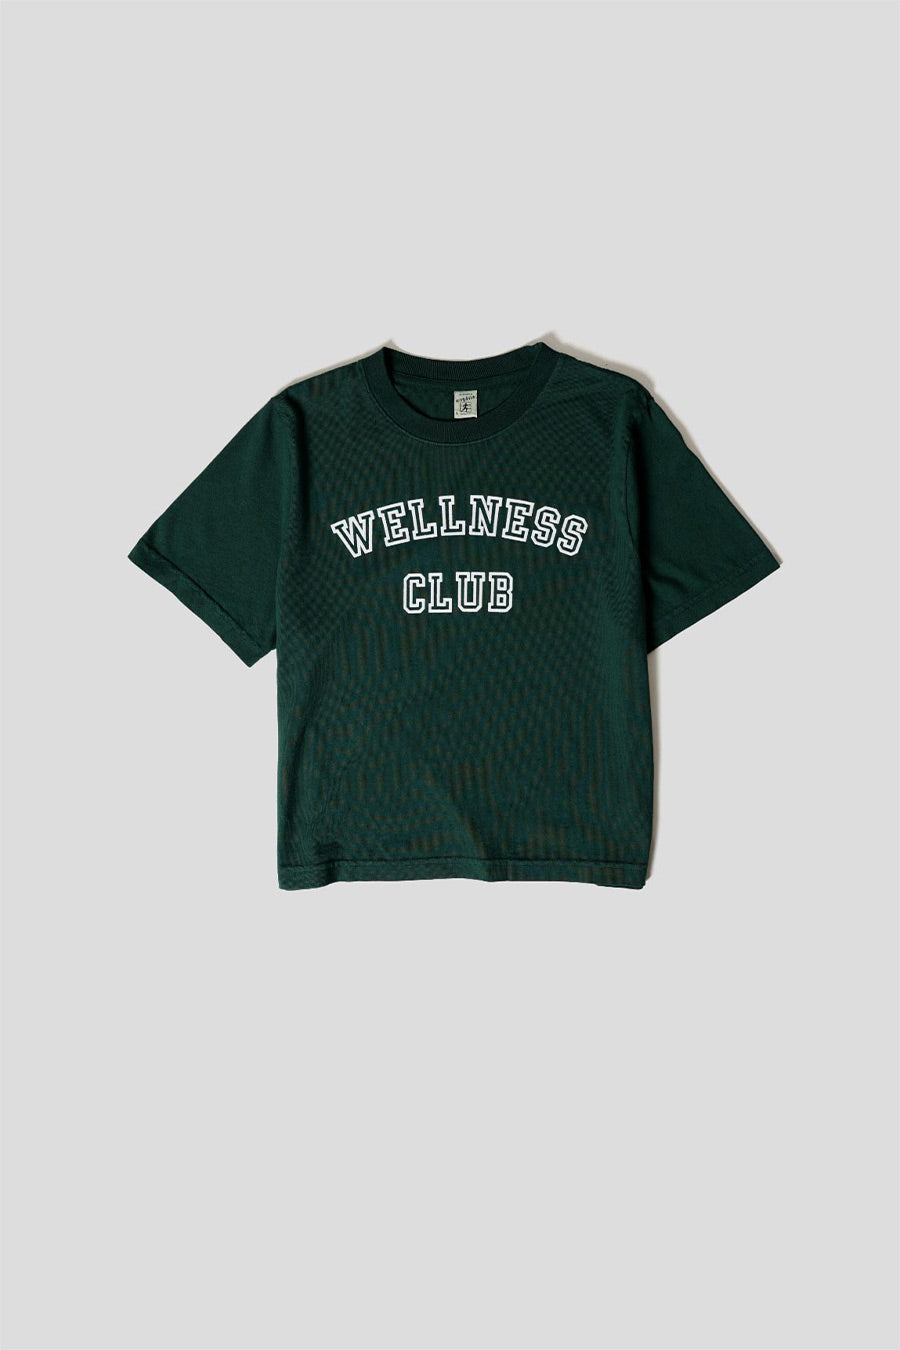 Sporty & Rich - WELLNESS CLUB FLOCKED CROPPED T-SHIRT FOREST GREEN - LE LABO STORE